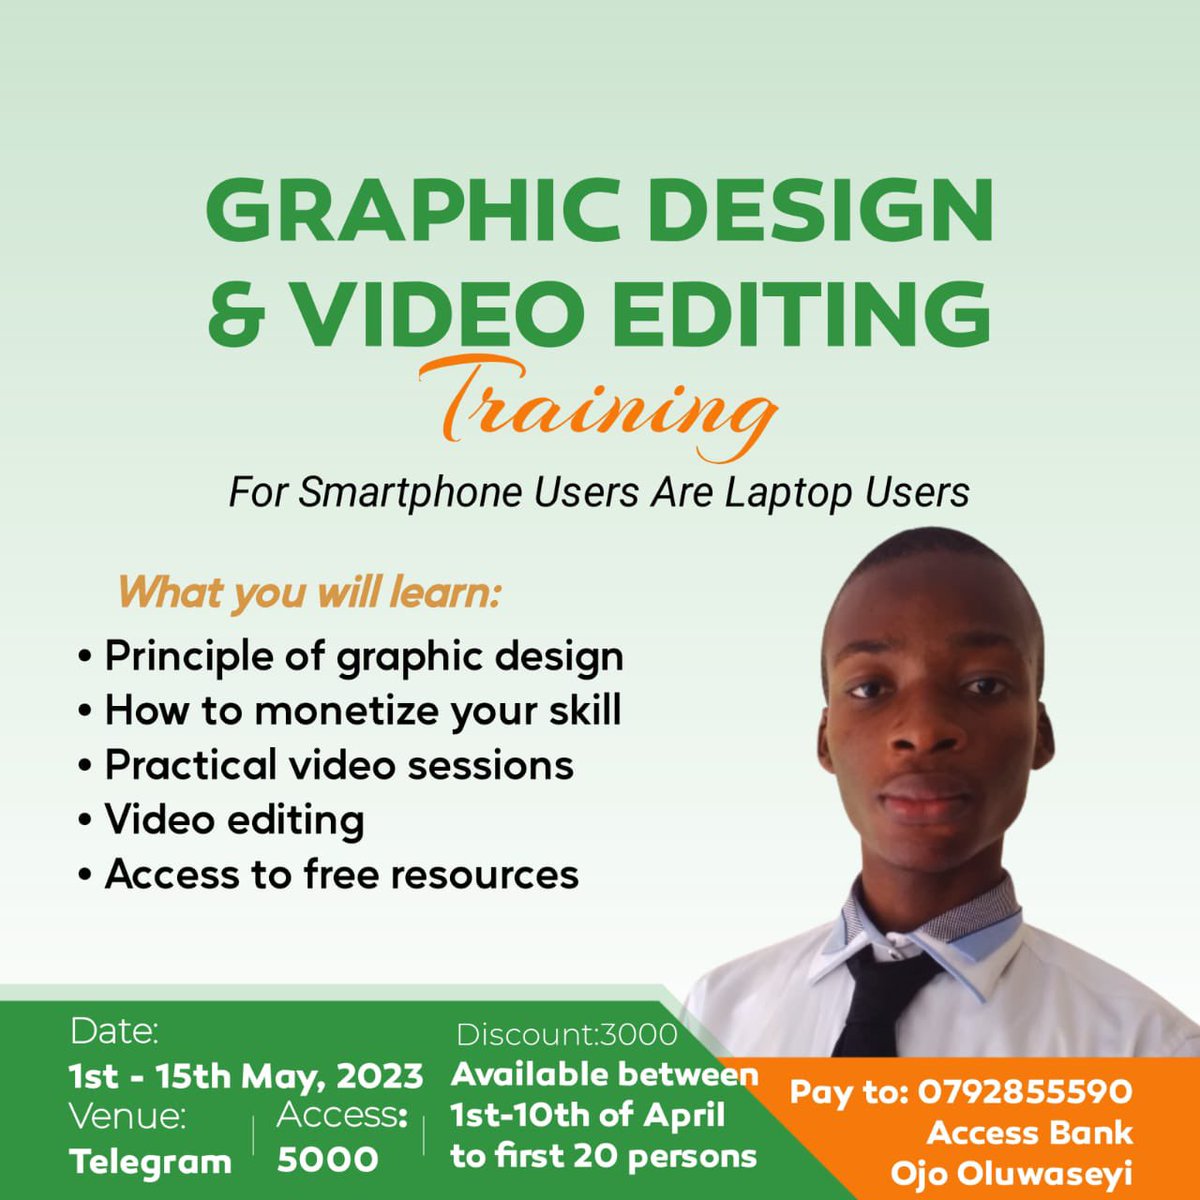 Sign Up Today For Video Editing & Graphics Training By Precious Graphics Institute 

What You Stand To Gain 

- Principle of Graphic Design 
- How To Monetize your Skills 
- Practical Video Session 
- Video Editing 
- Free Access To Resources 

#gainwithpaula #gainwithspikes